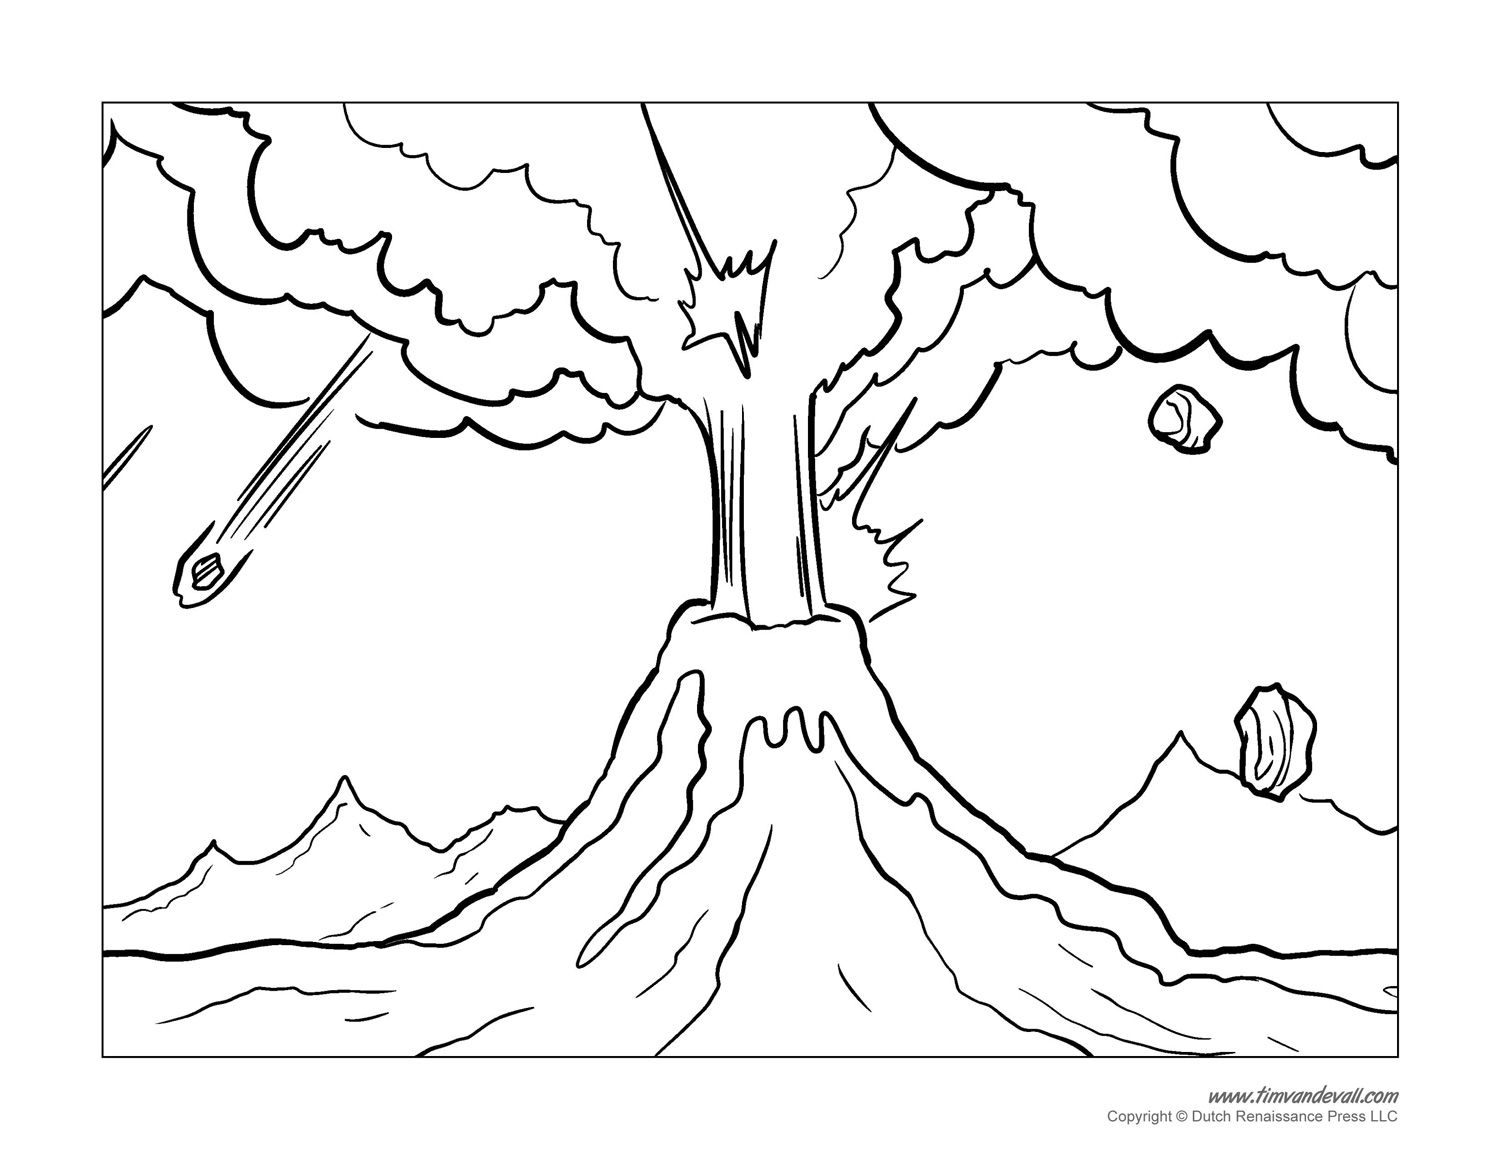 Volcanic Island coloring #11, Download drawings